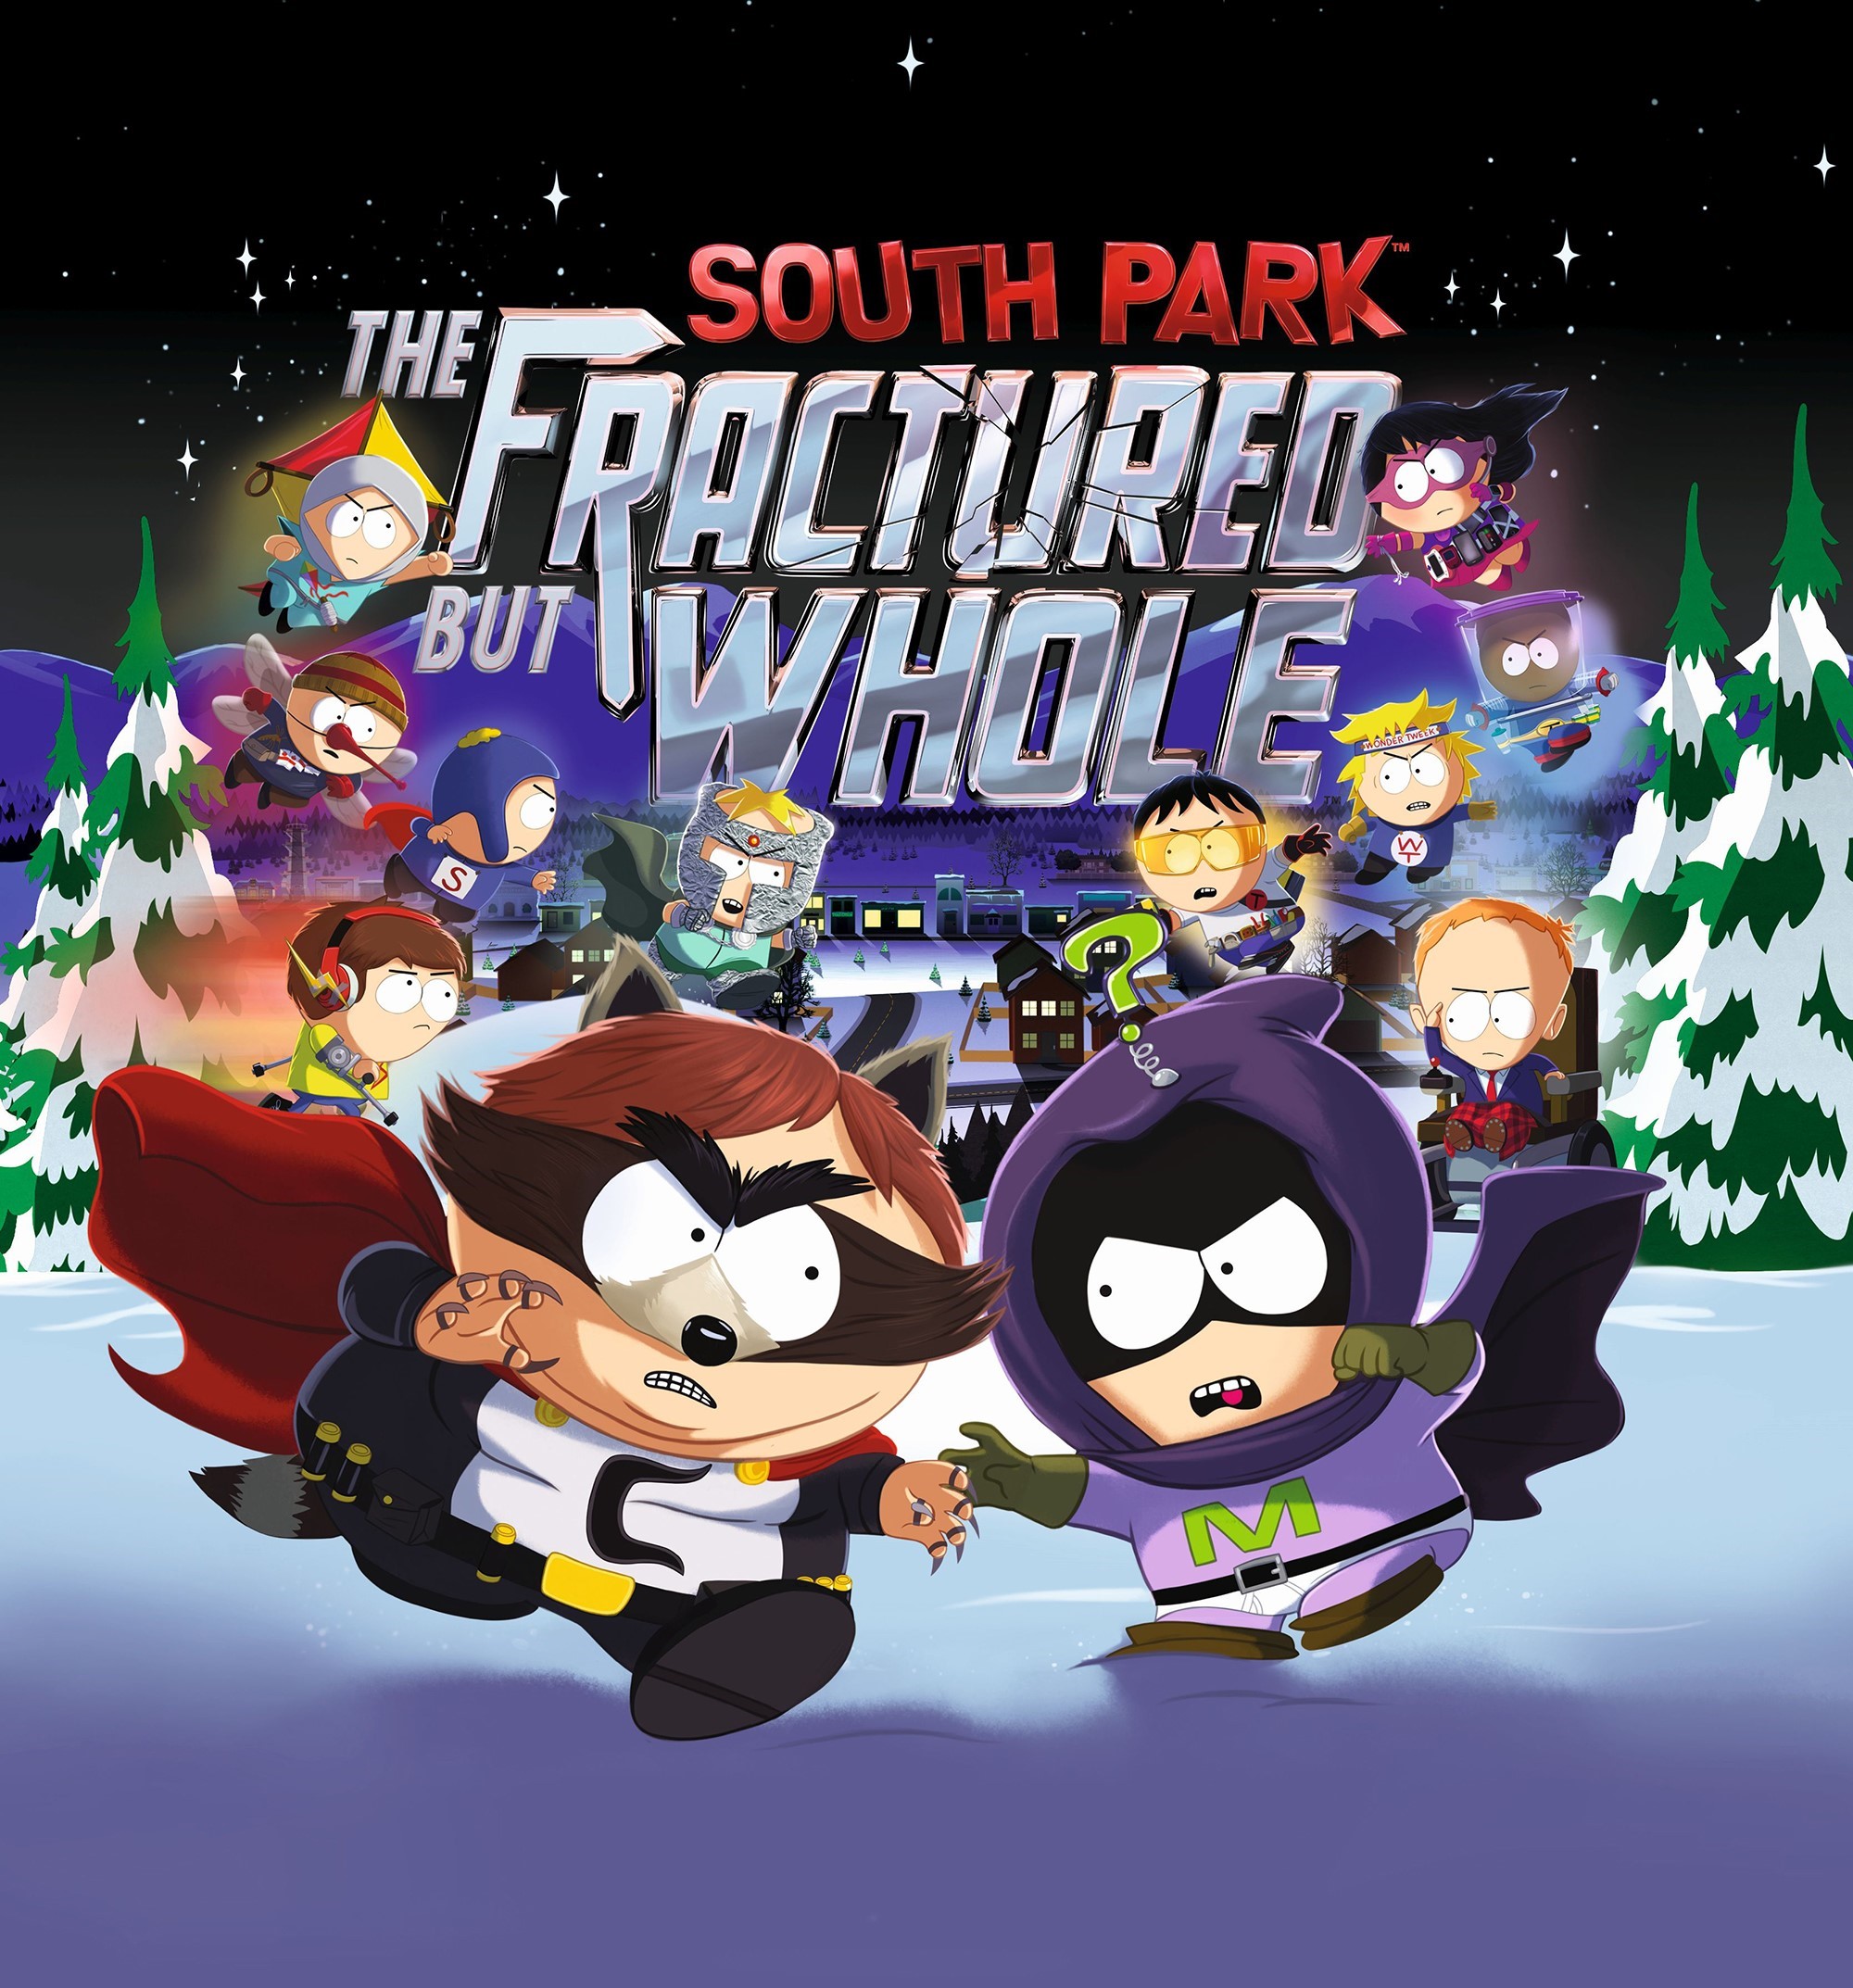 South park the fractured but whole купить ключ steam дешево фото 2